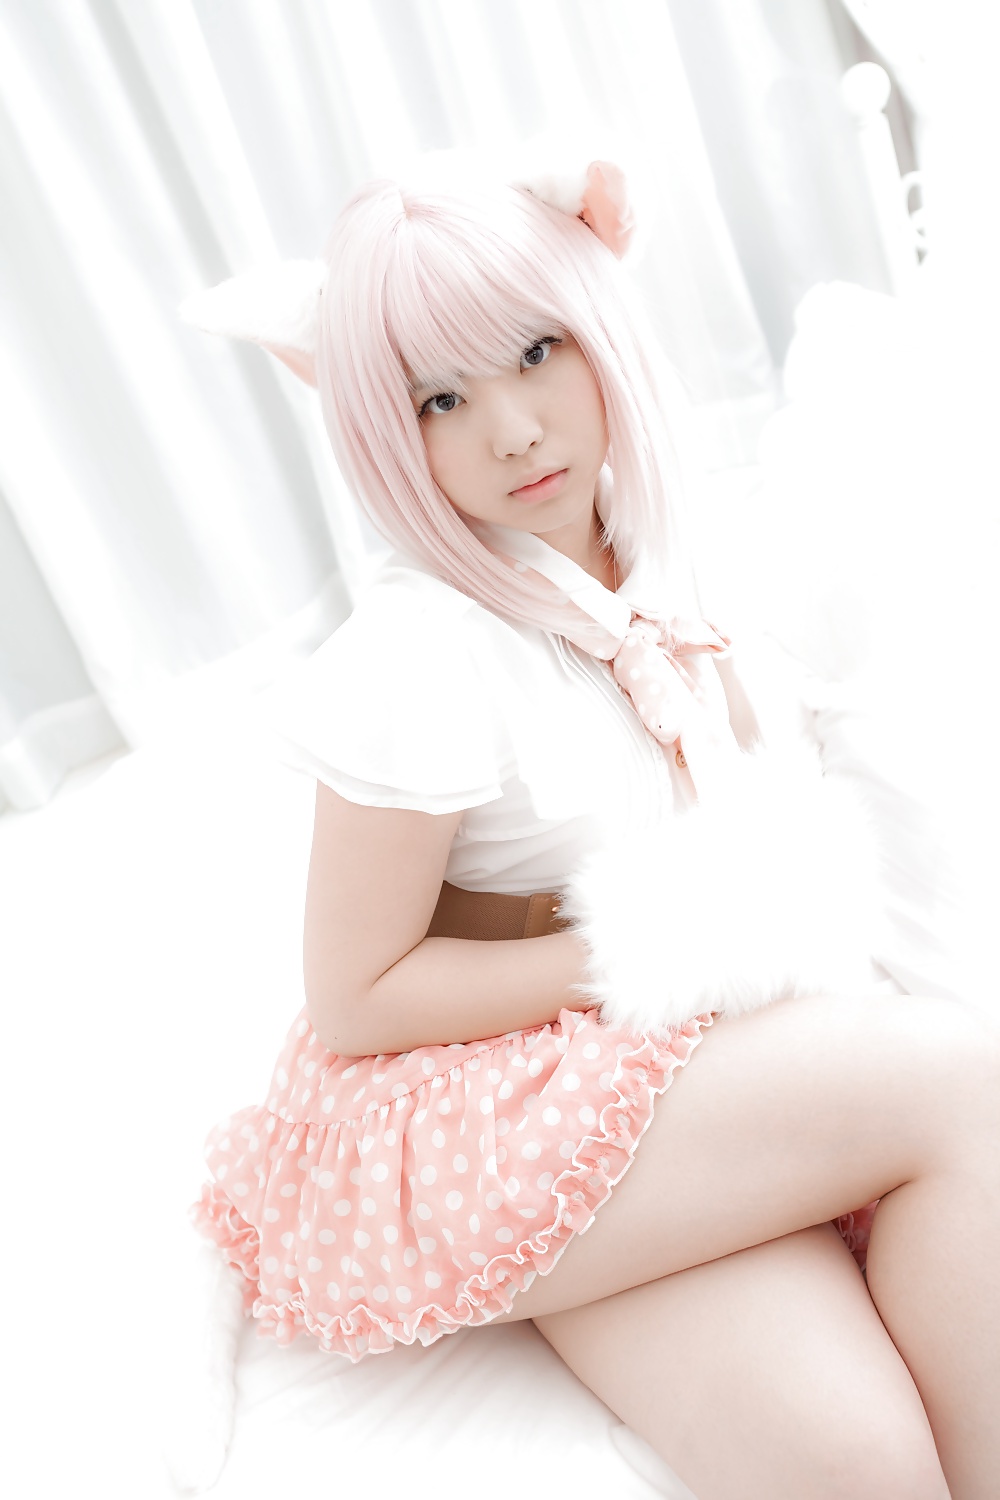 Asiatica cosplay in bianco
 #26558671